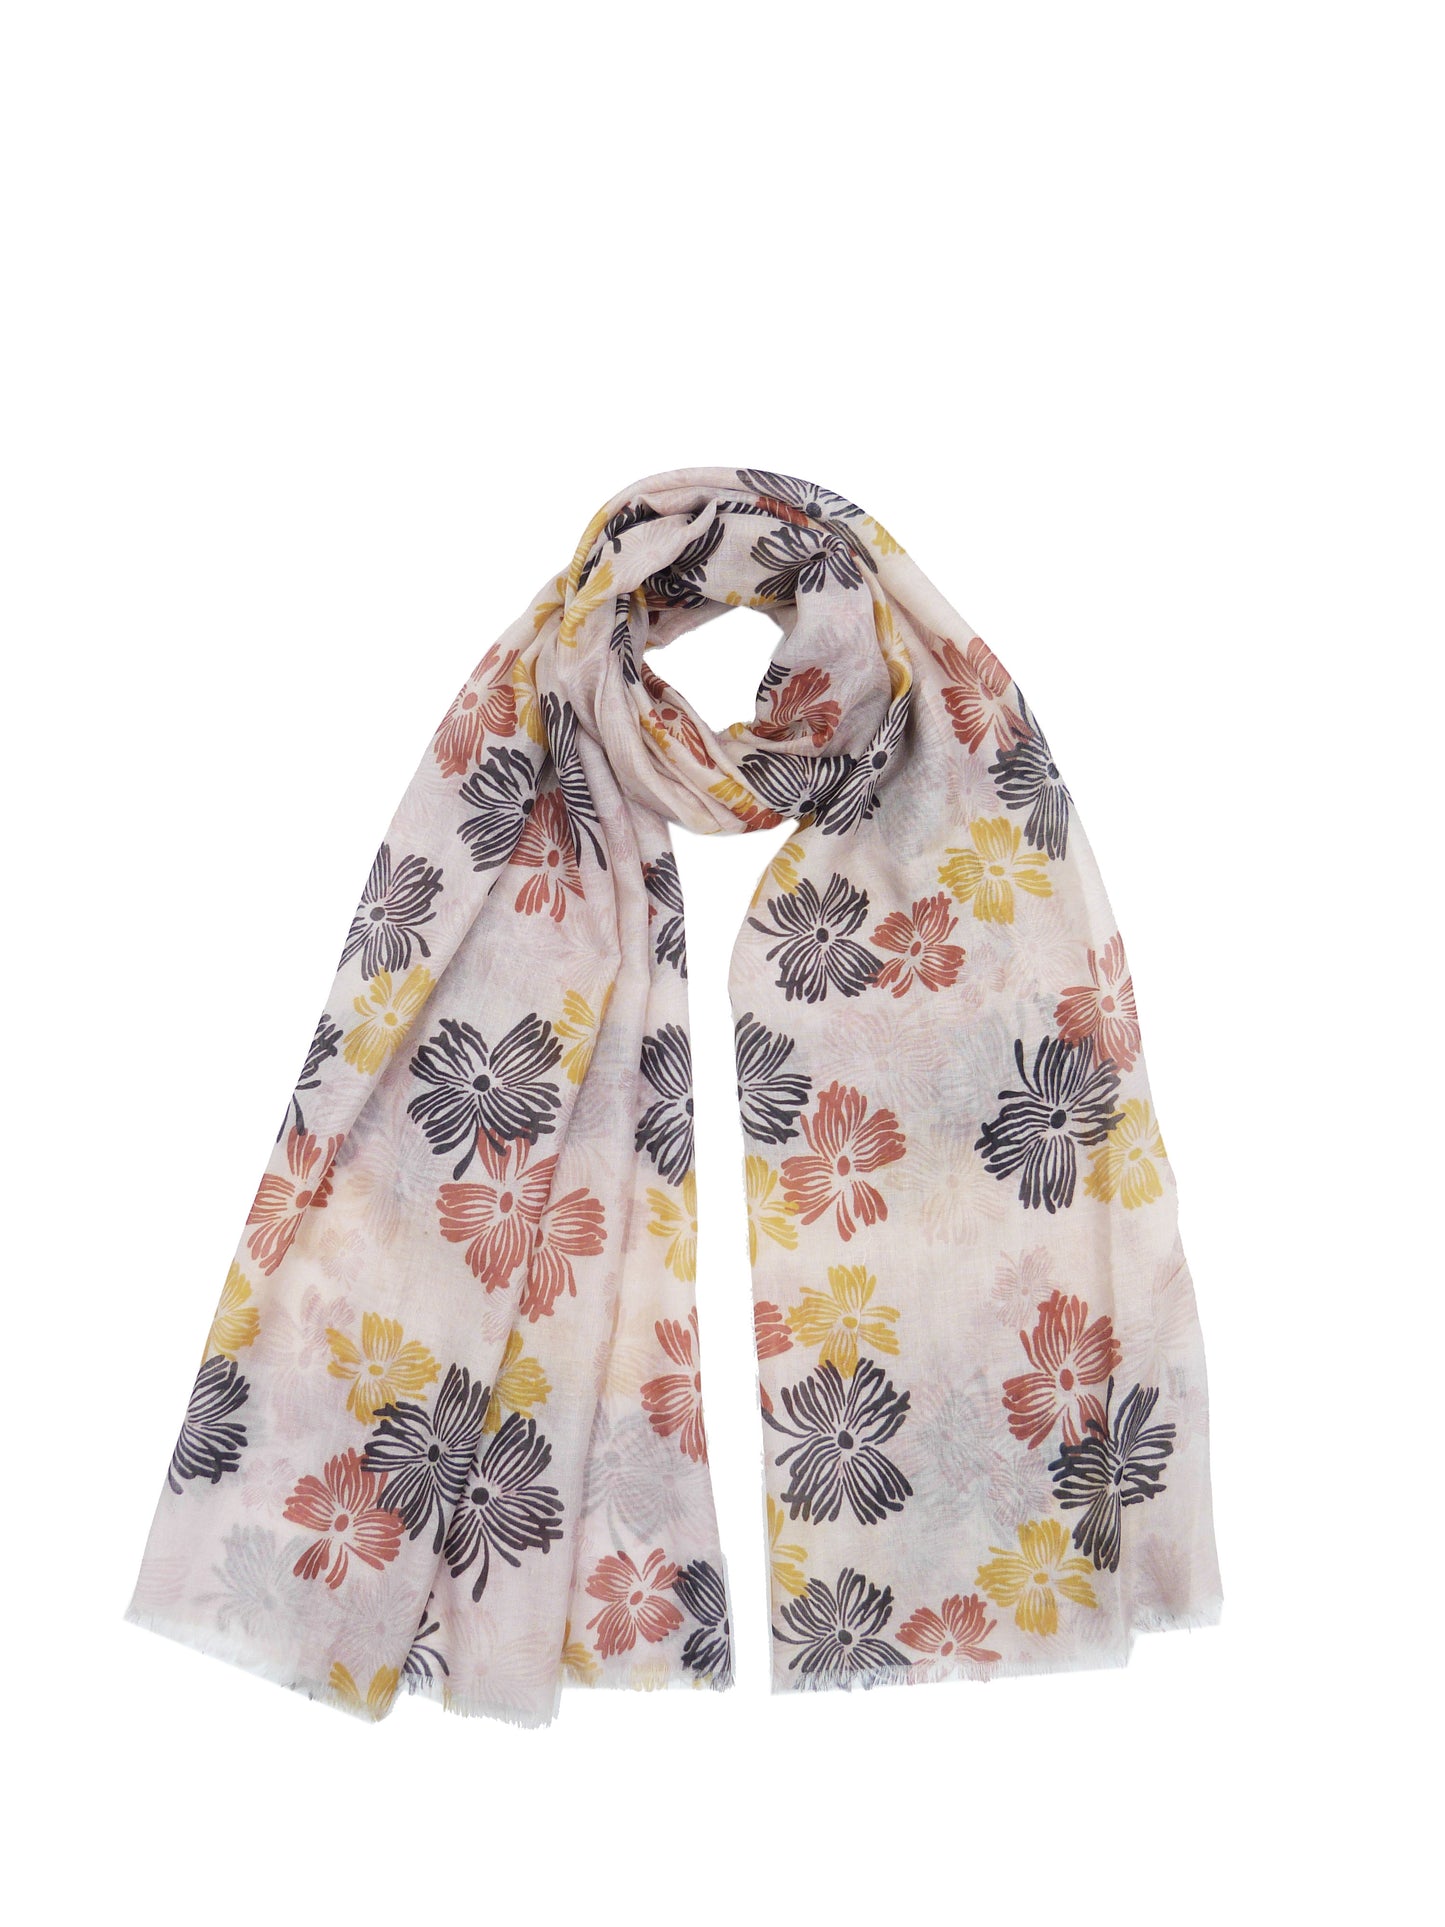 Flower Patterned High Quality Fashion Scarf